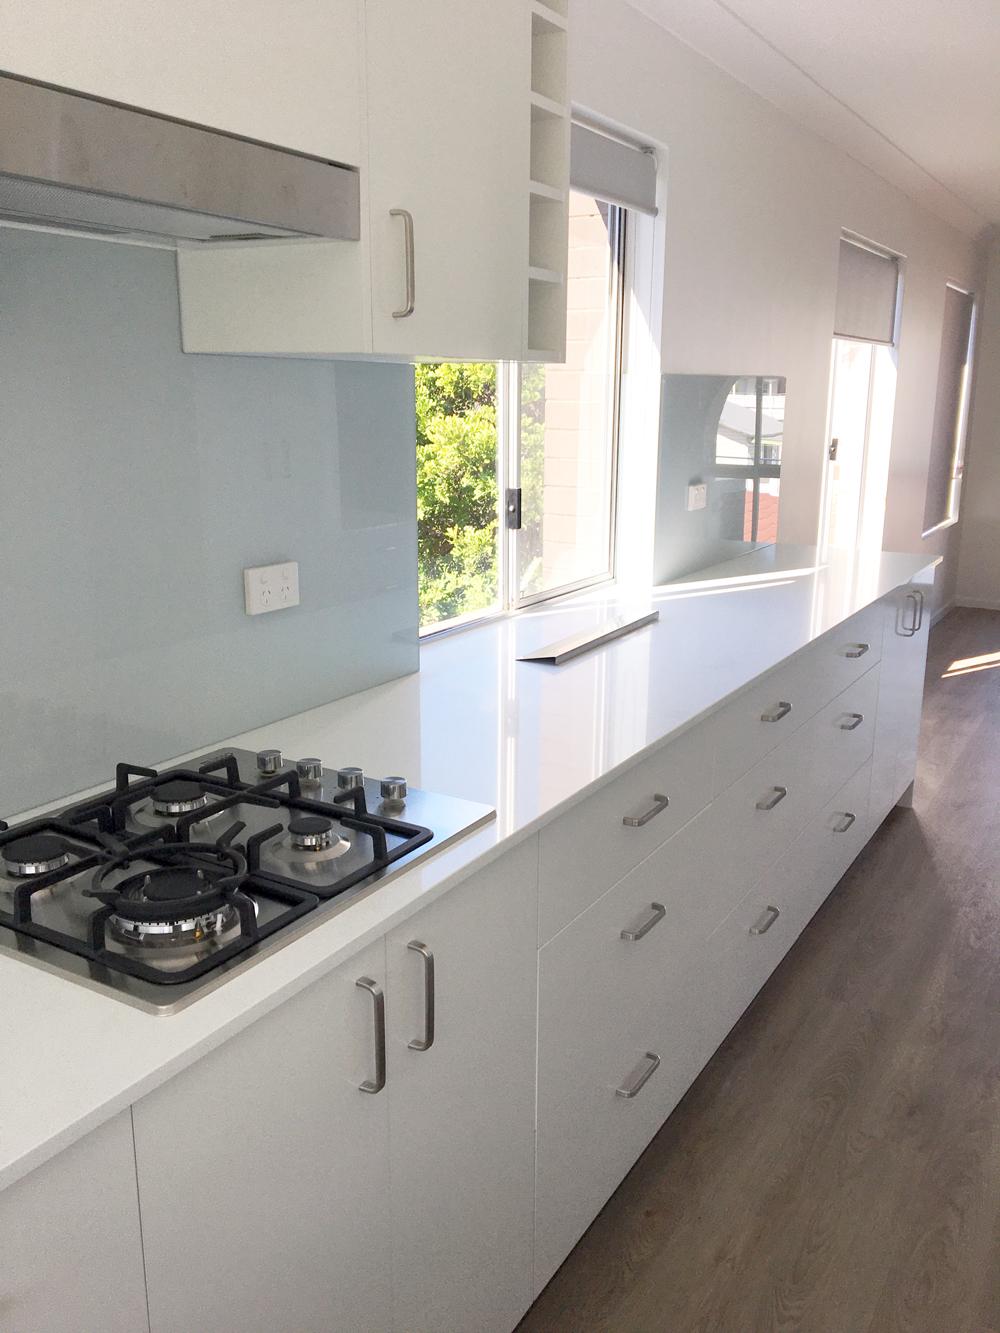 Kitchen builder and designer, Gecko Kitchens is a qualified licence builder for Kitchens, Bathrooms, Laundries in Brisbane